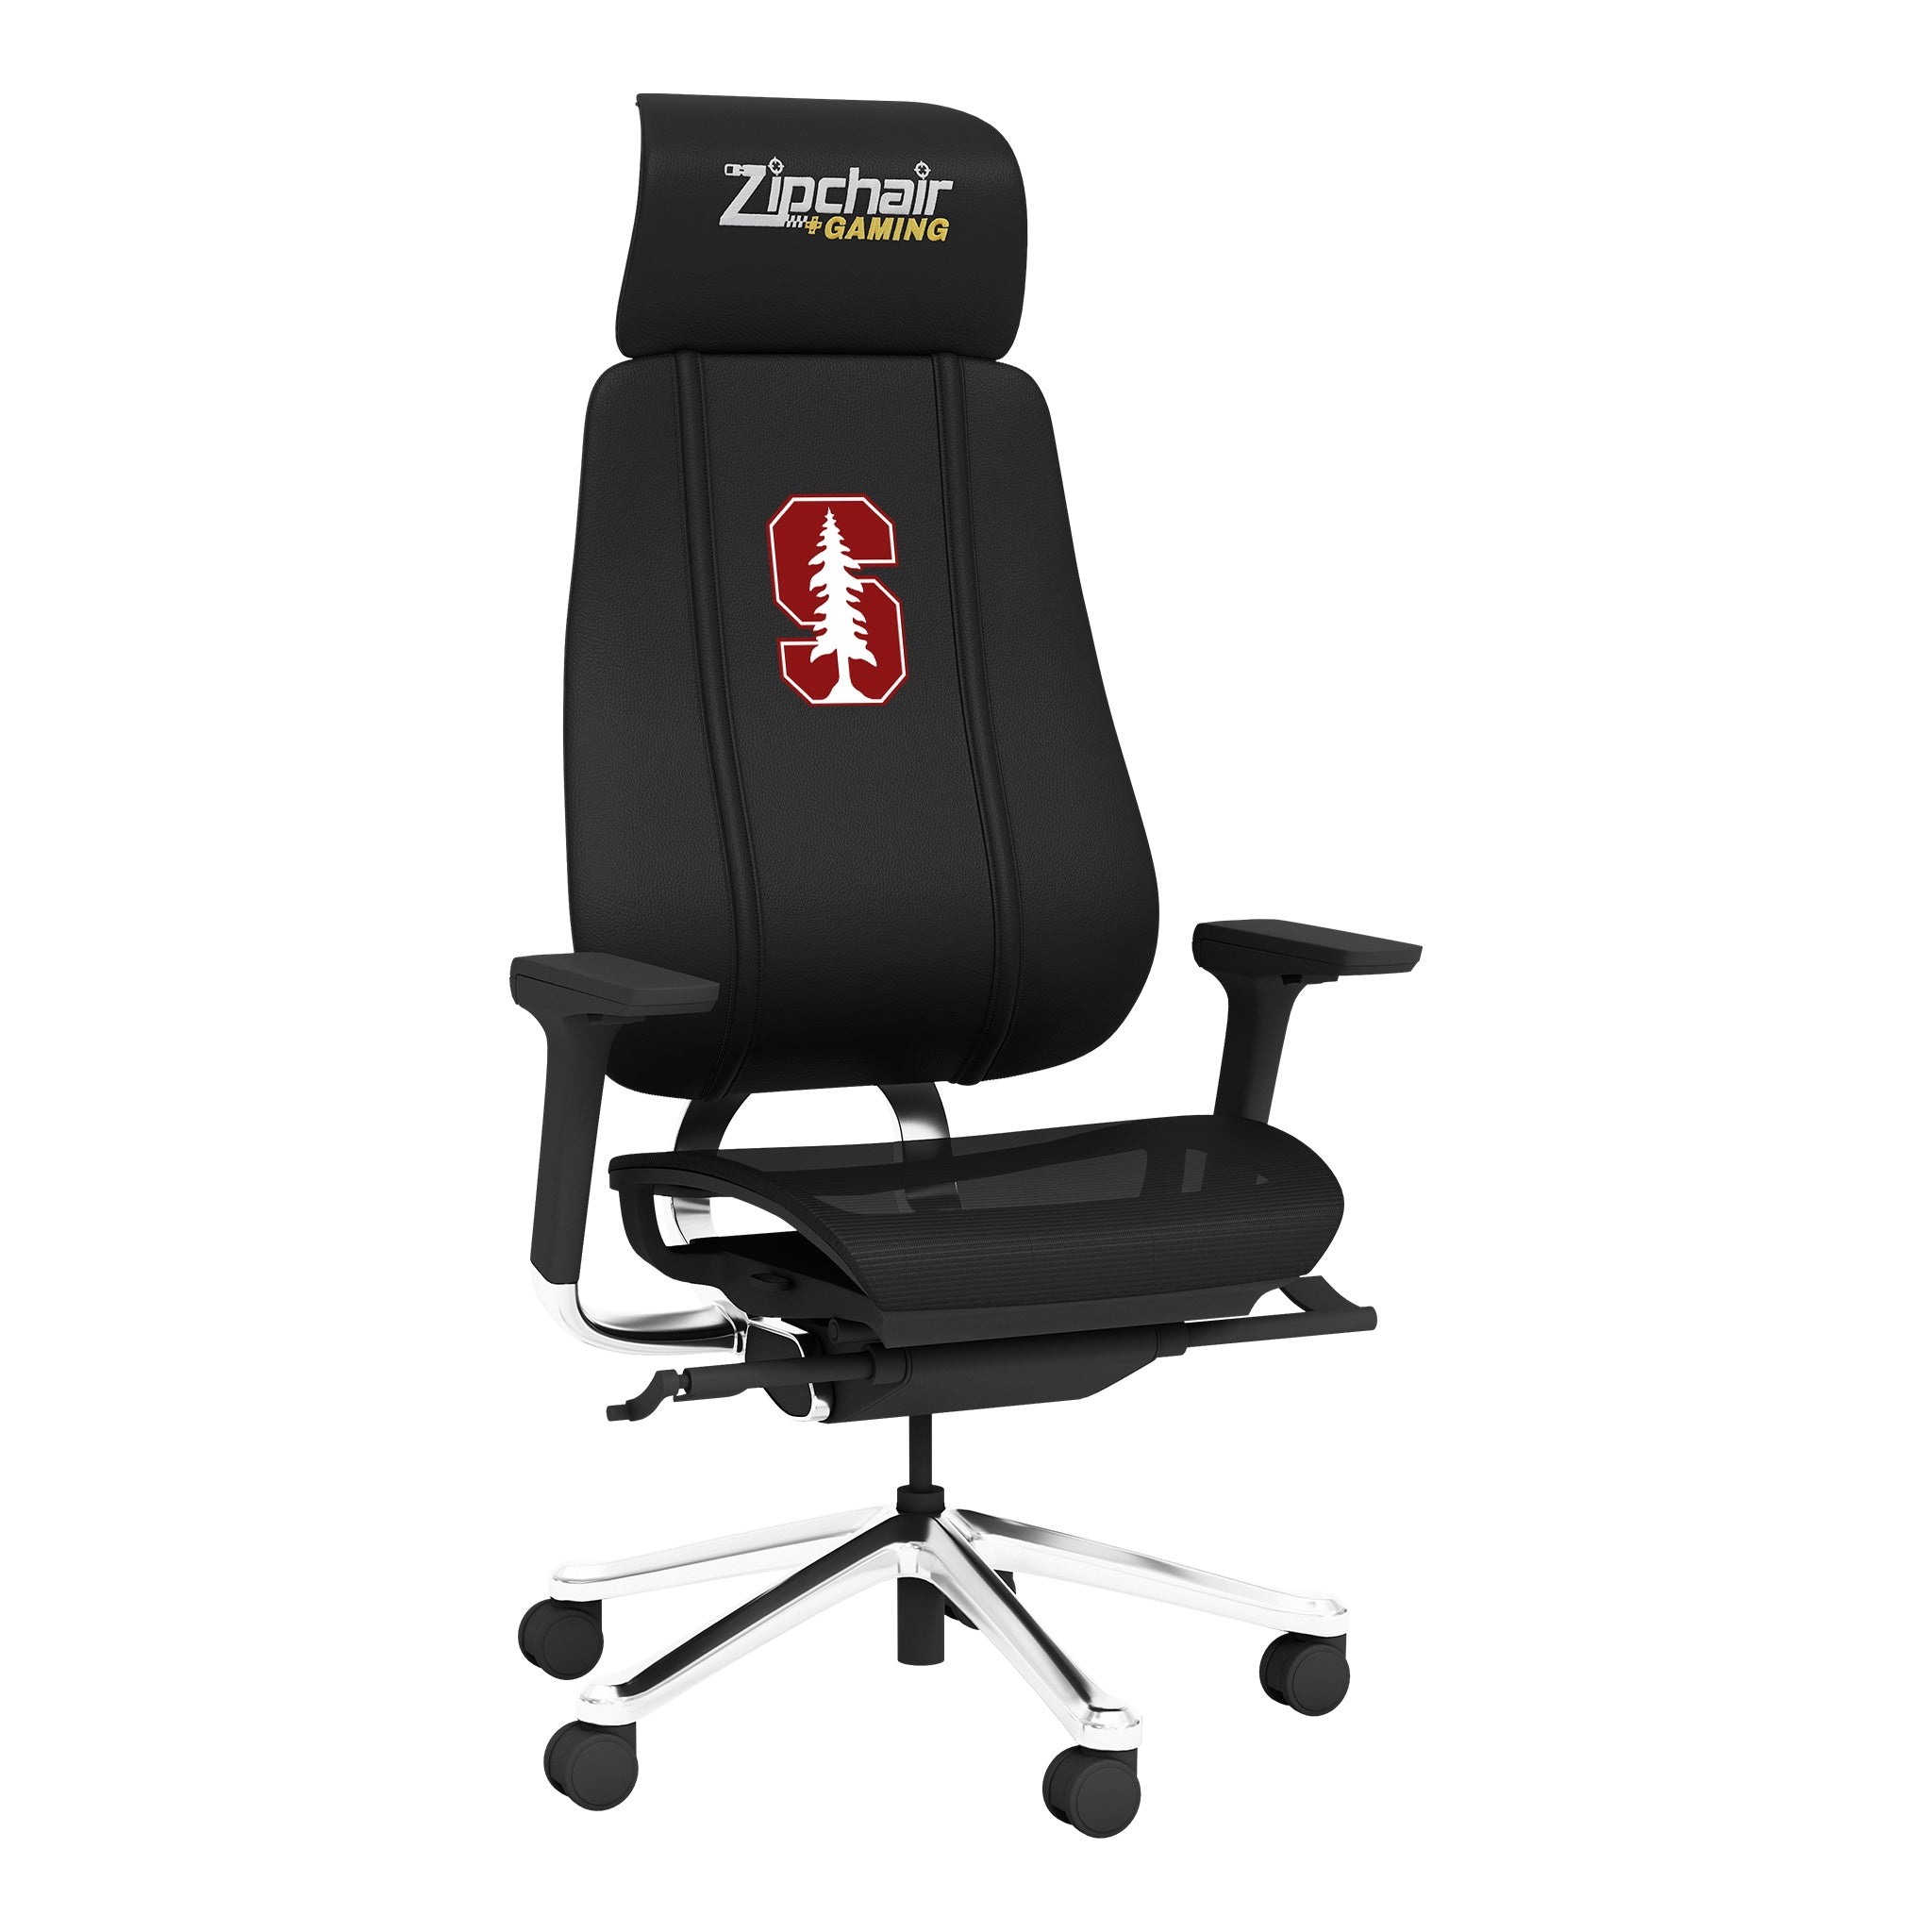 Stanford Cardinals PhantomX Gaming Chair with Stanford Cardinals Logo